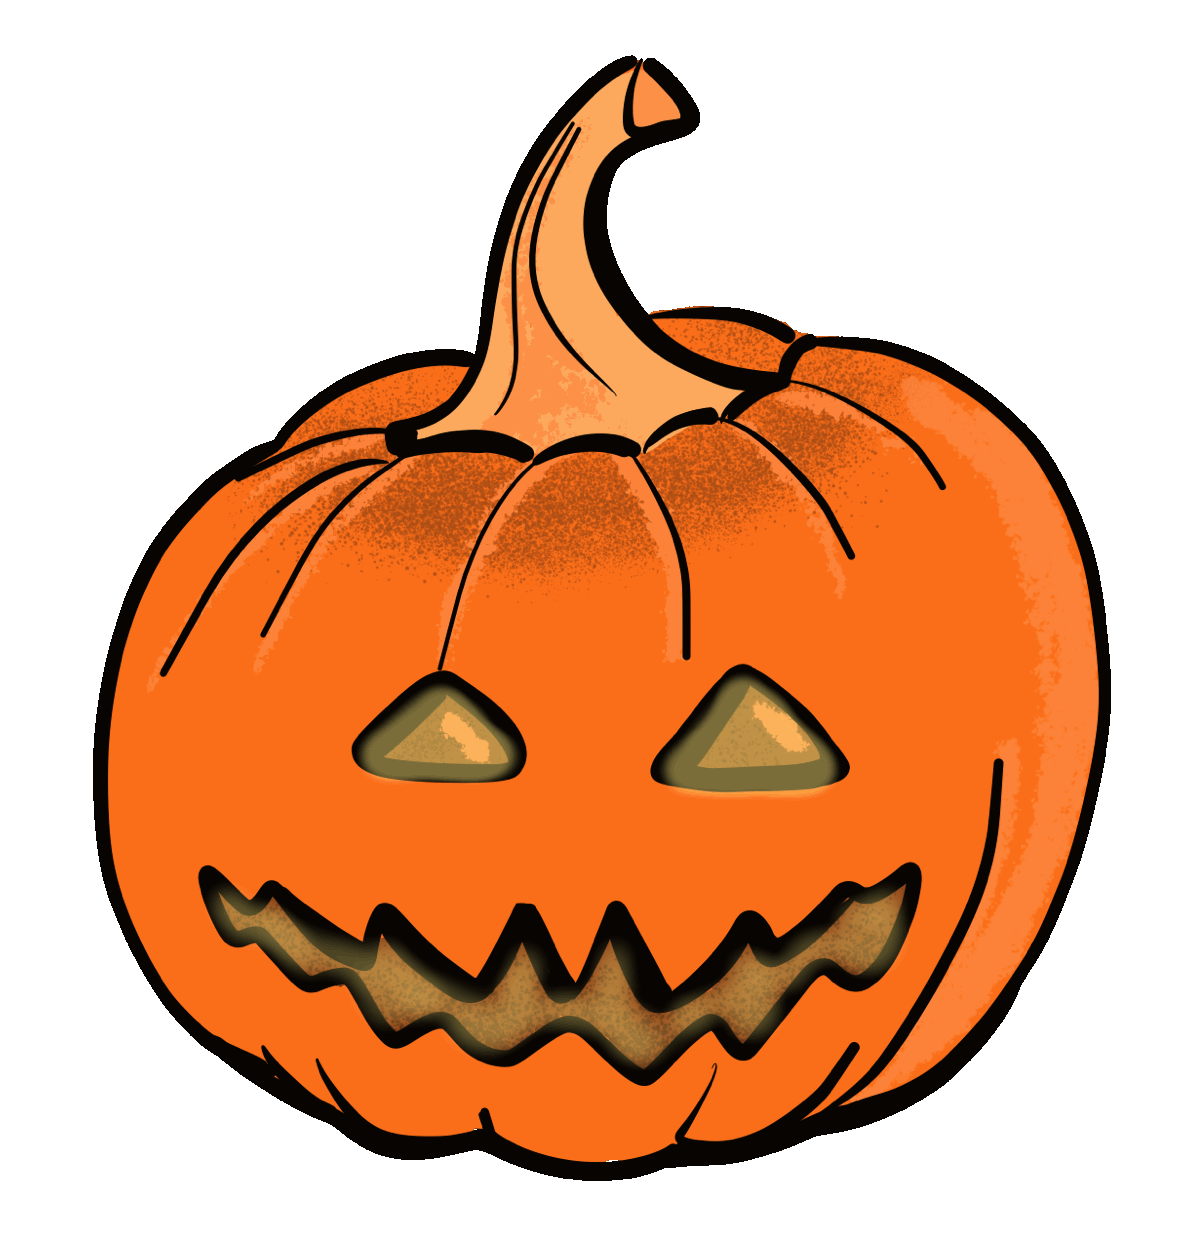 Halloween Pumpkin Sticker by GU for iOS & Android | GIPHY